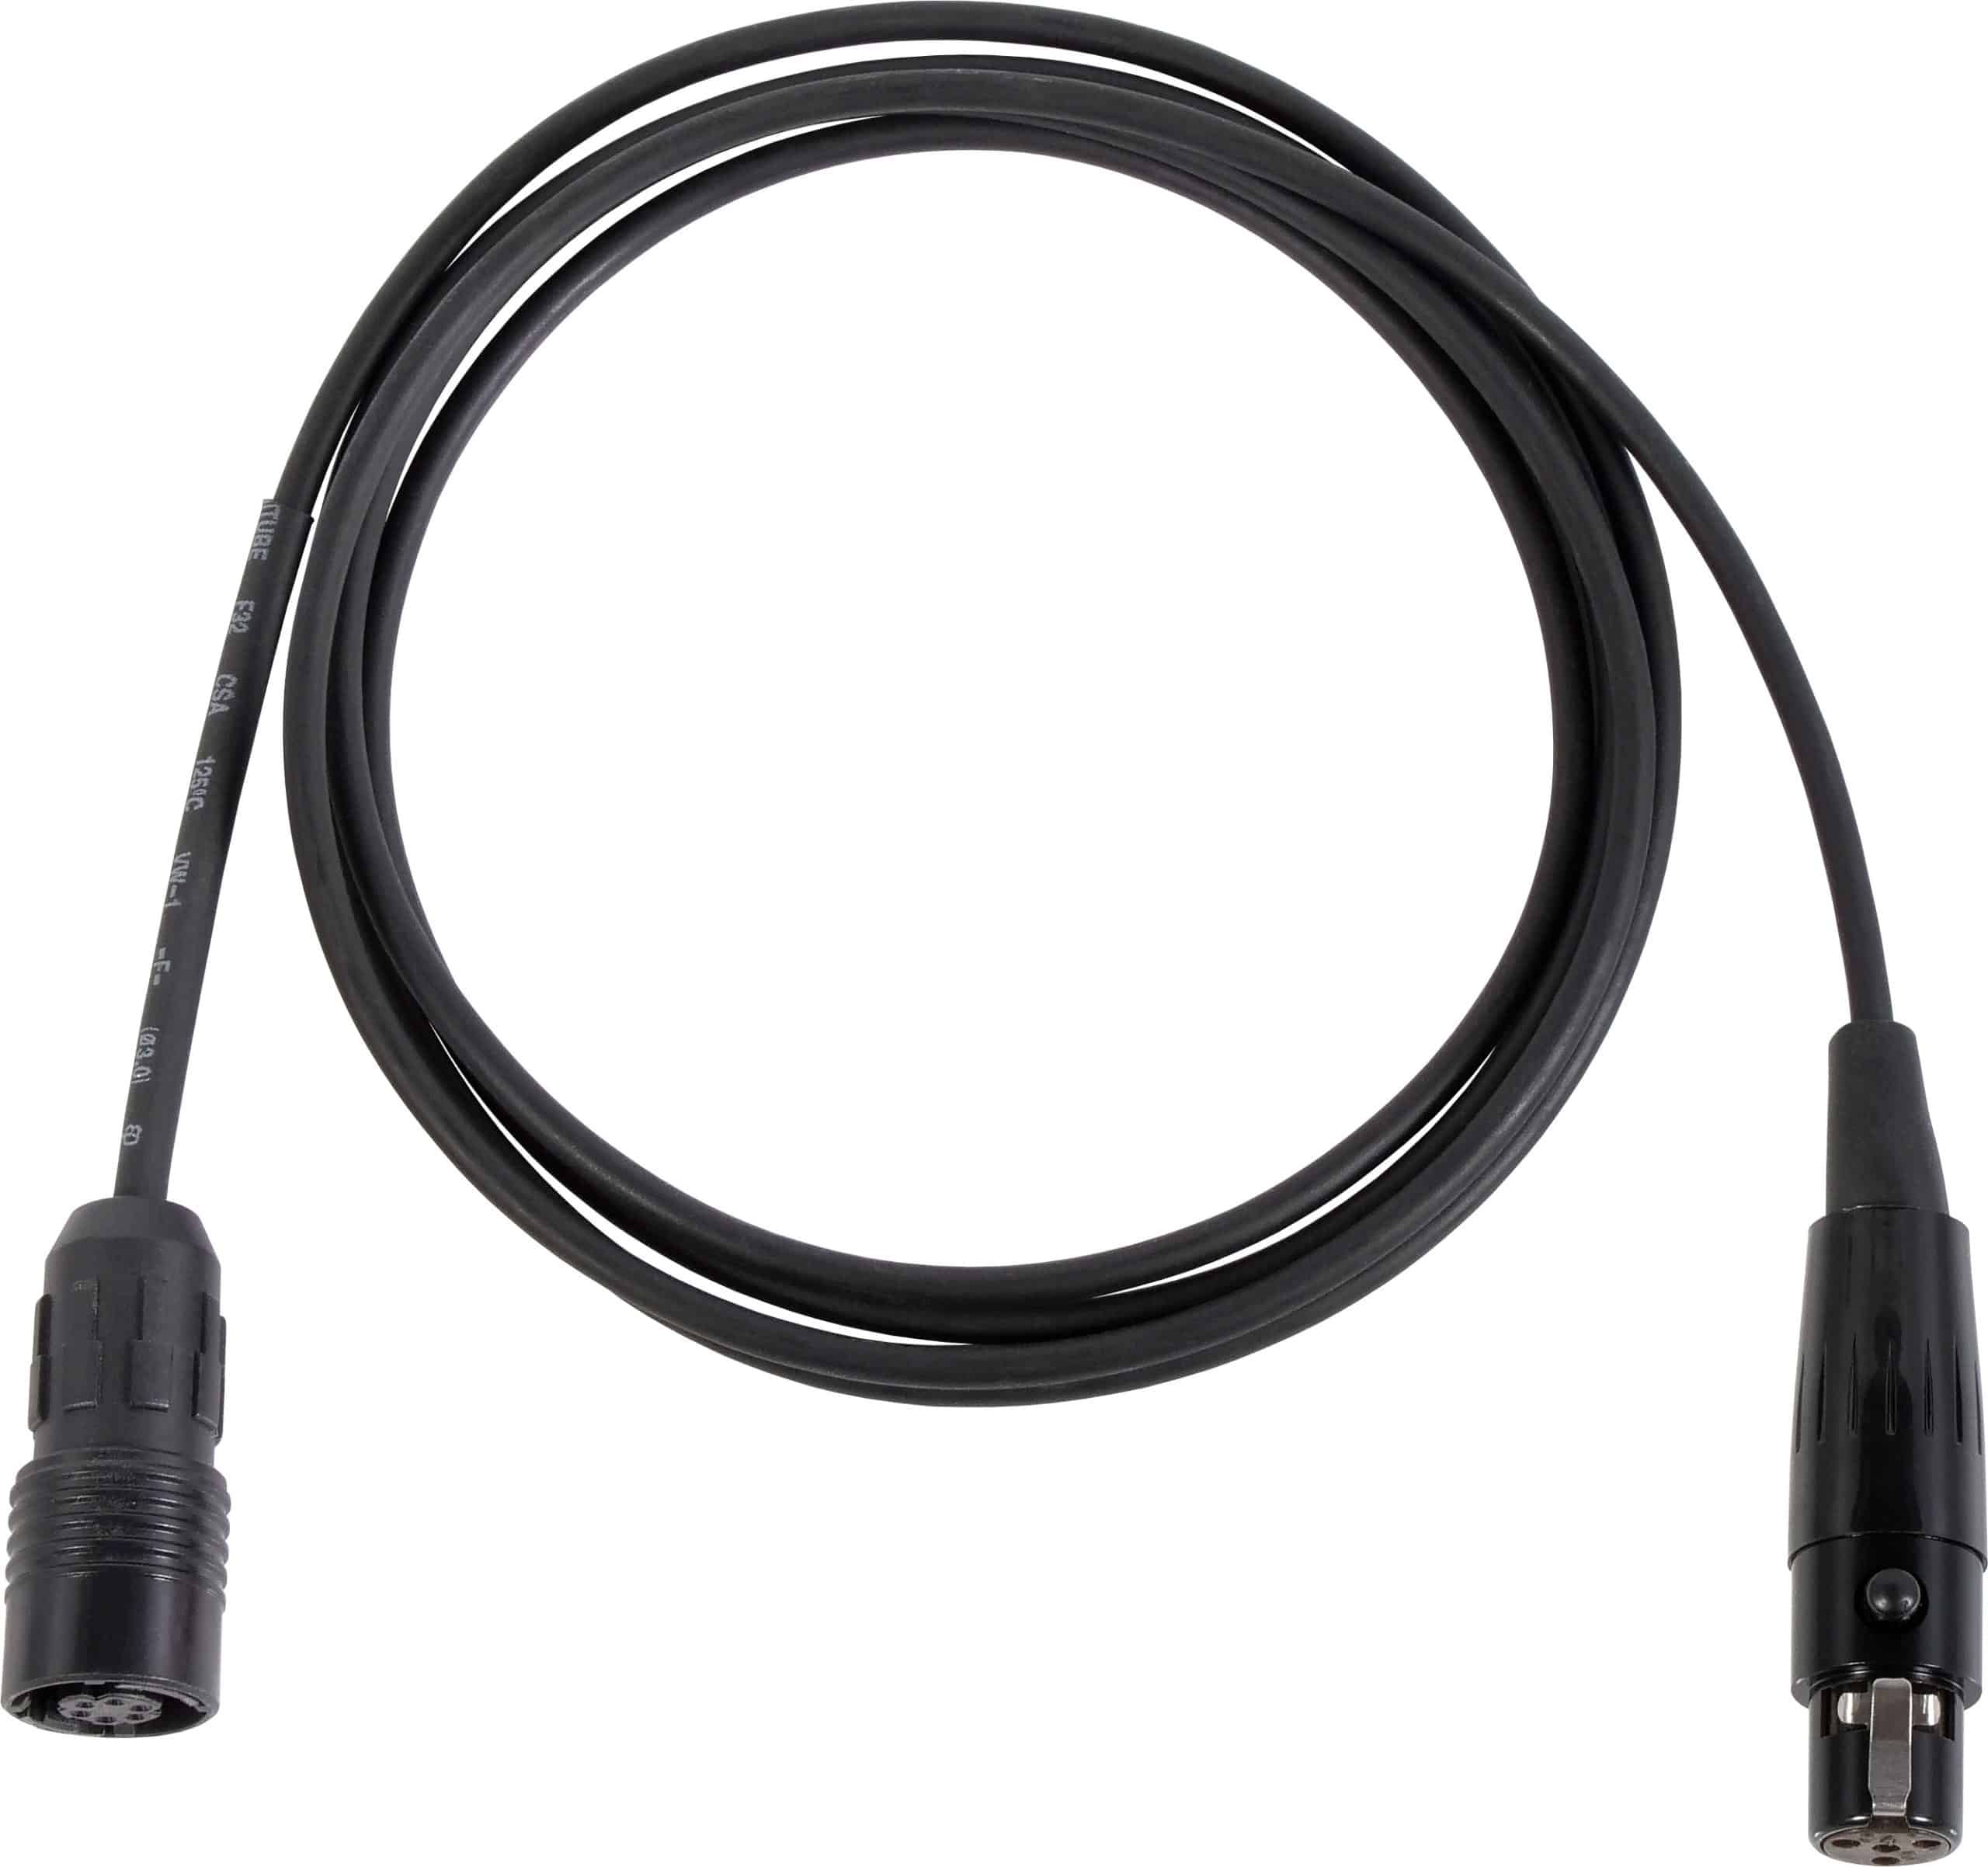 CBL2OSHUBK Cable – For H2O7 Wireless Headset Mic Cable for Shure® systems